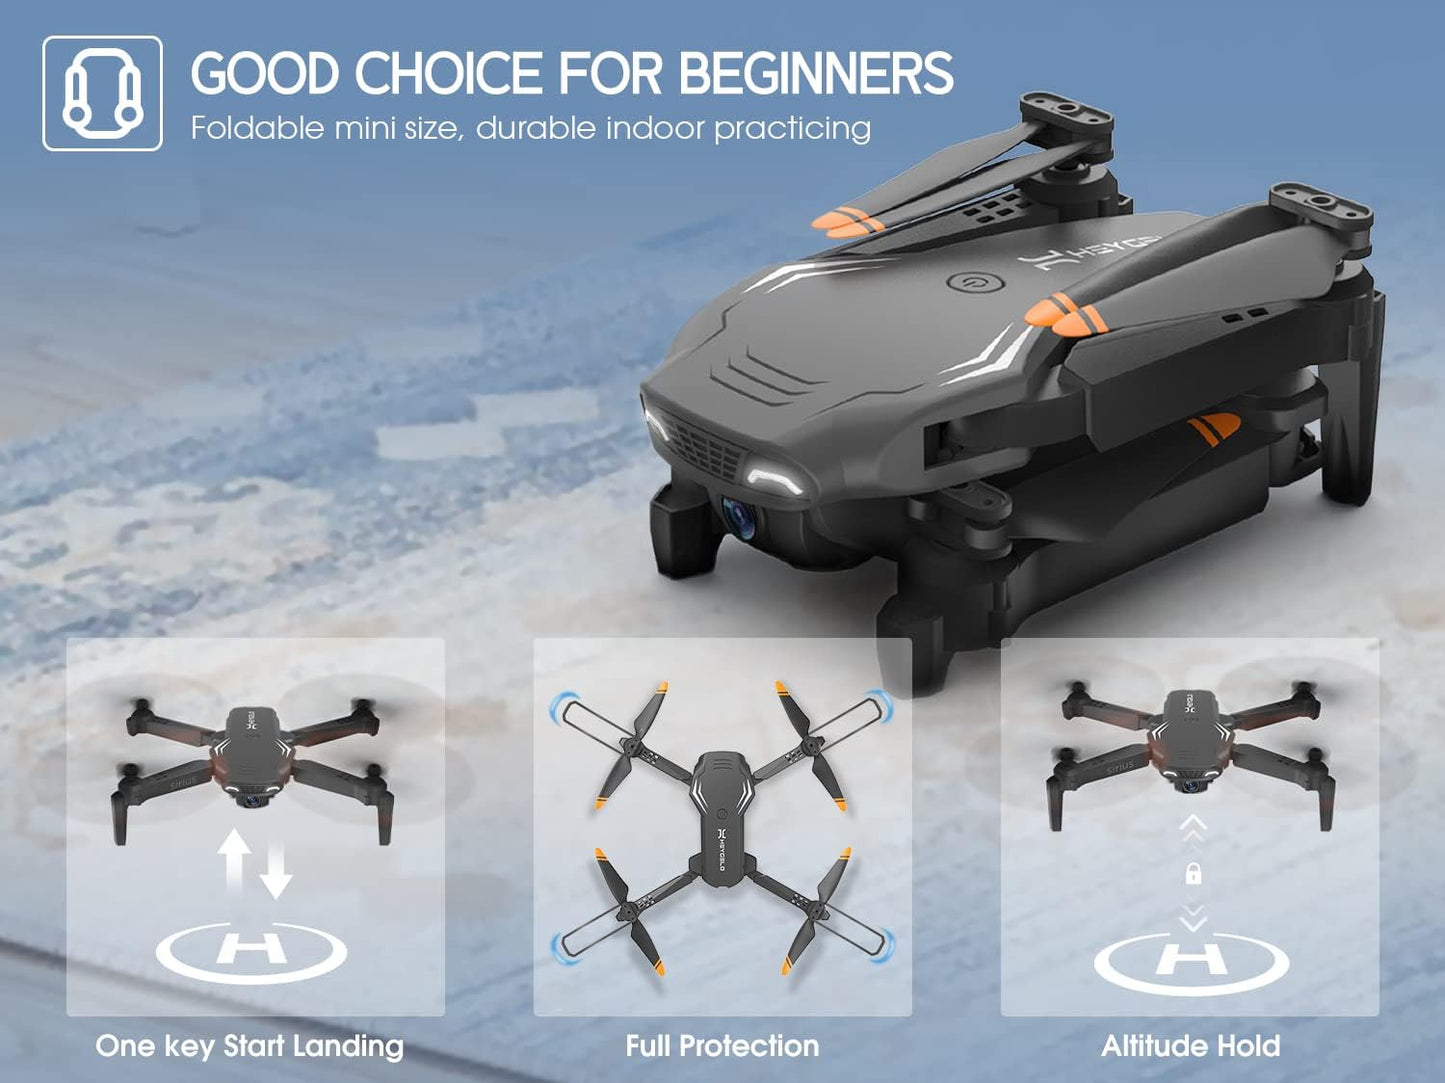 S90 Drone with Camera for Adults, 1080P HD Mini FPV Drones for Kids Beginners, Foldable RC Quadcopter Toys Gifts for Boys Girls with Altitude Hold, Voice/Gesture Control, 3 Speeds, 2 Batteries